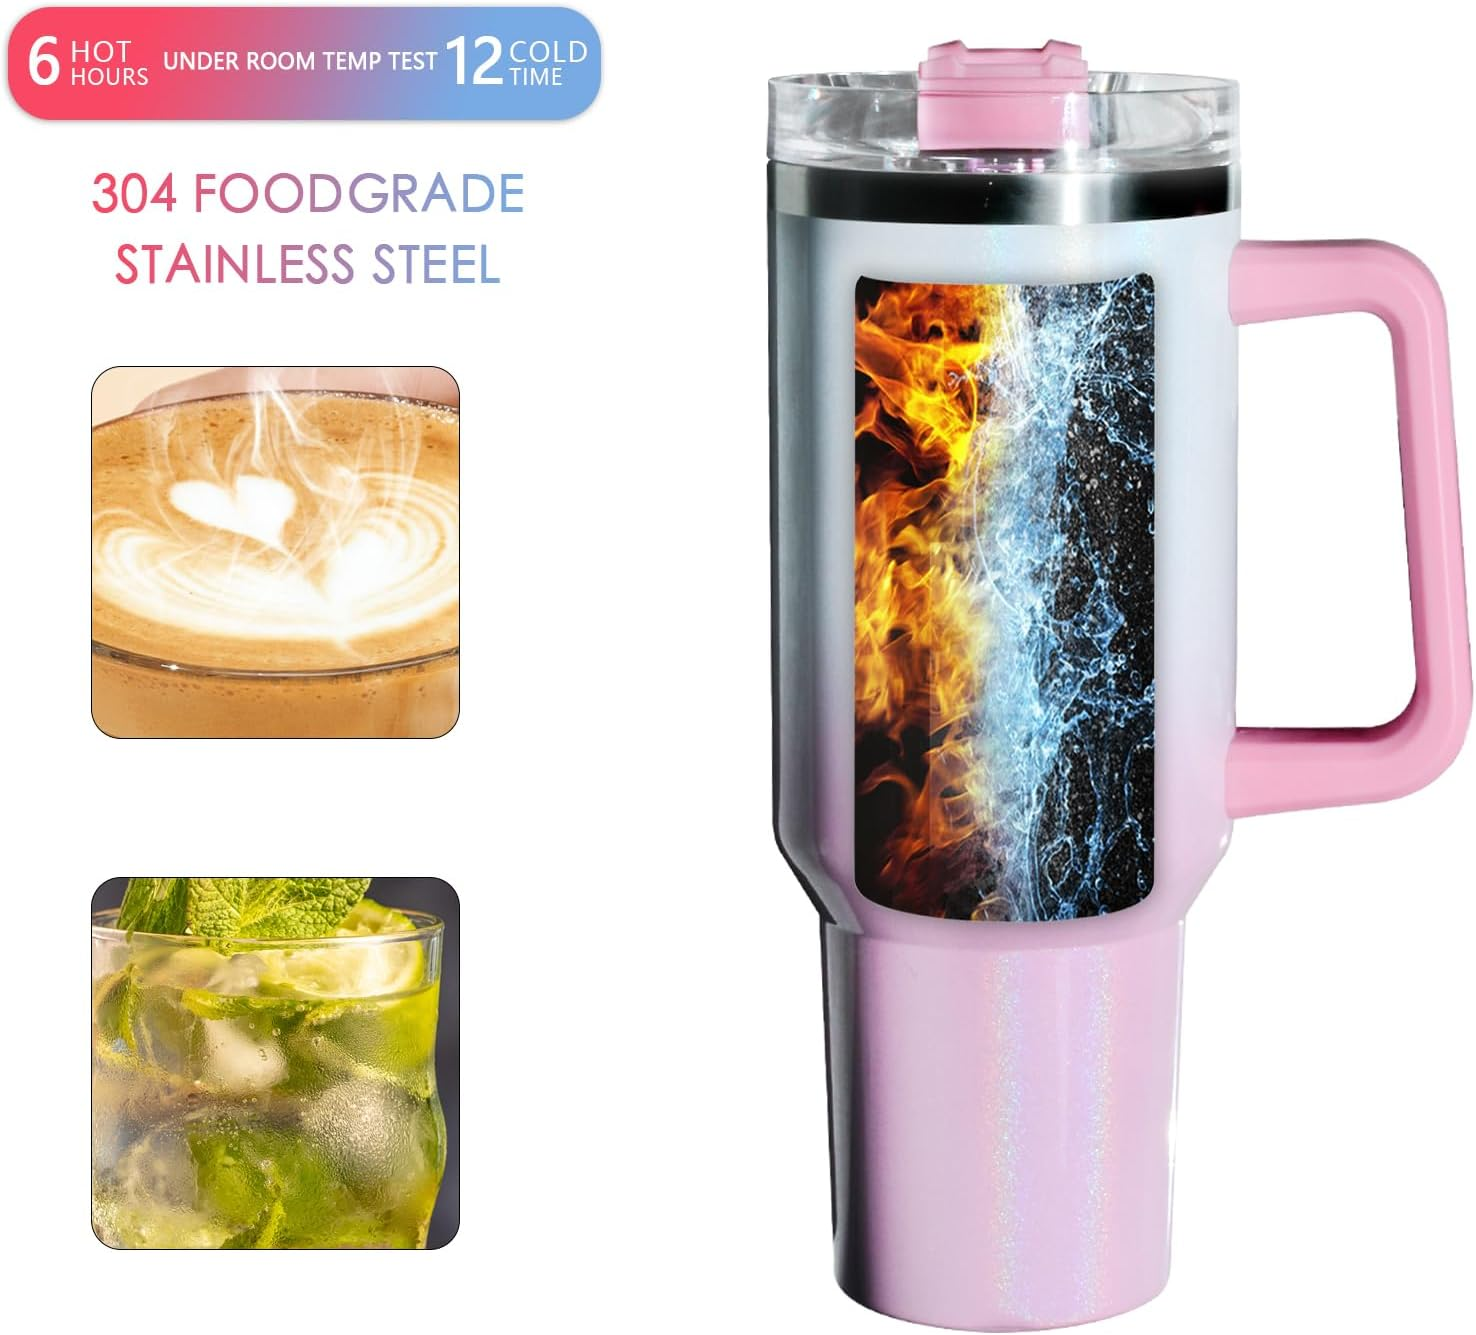 LOGo 40oz Sublimation Glitter 30 Oz Sublimation Tumblers With Handle  Stainless Steel Vacuum Insulated Coffee Mugs With Double Wall Cups From  Wingarden, $11.5